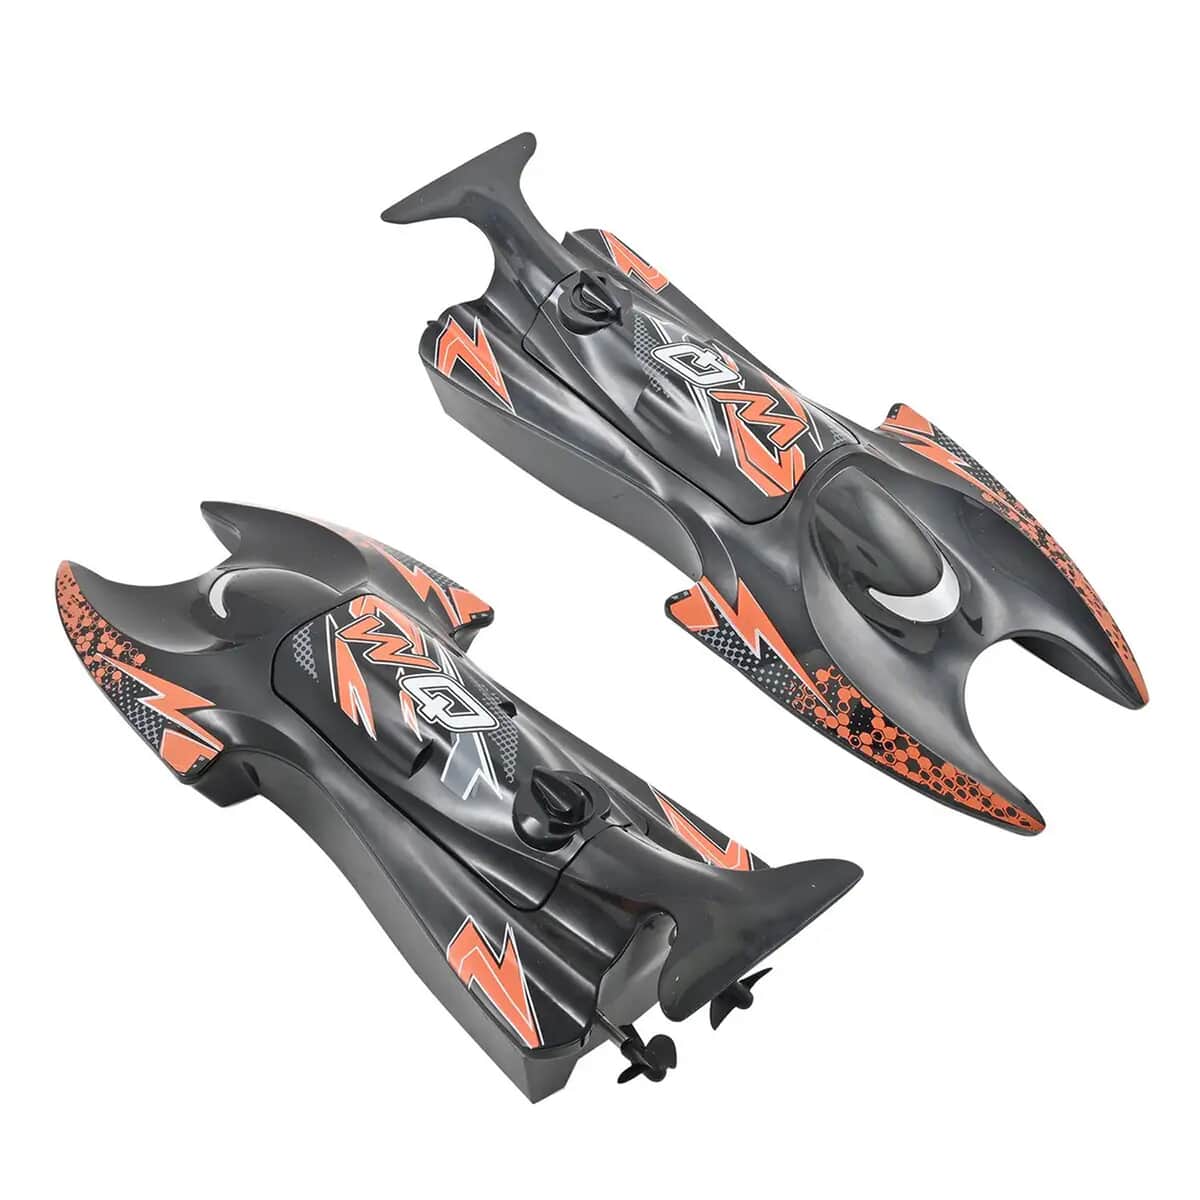 WQ Orange and Black Remote Control Speed Boat image number 4